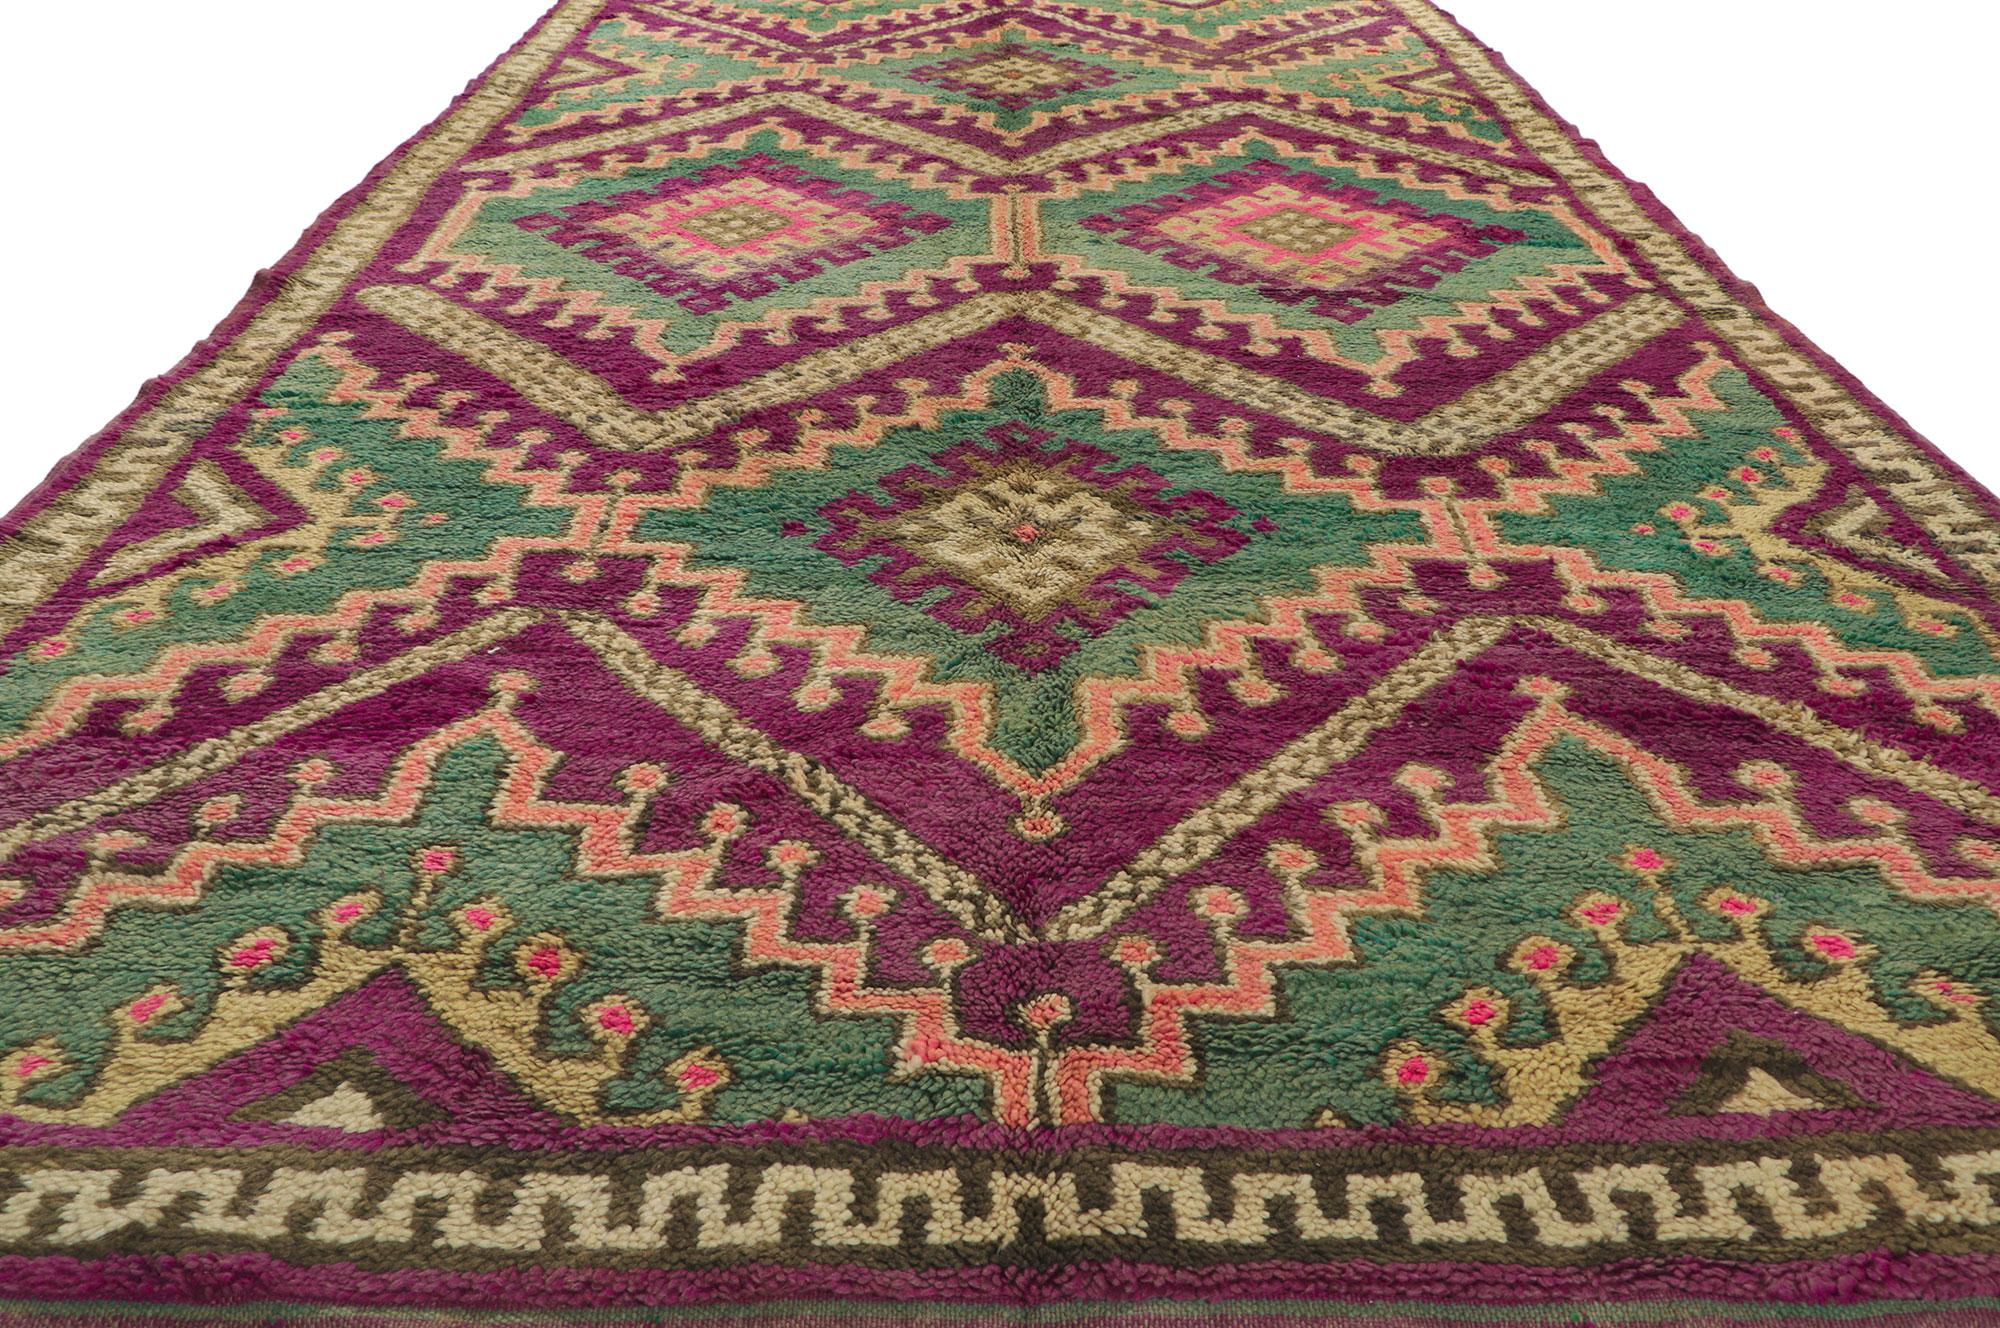 Vintage Berber Moroccan Rug with Bohemian Style In Good Condition For Sale In Dallas, TX